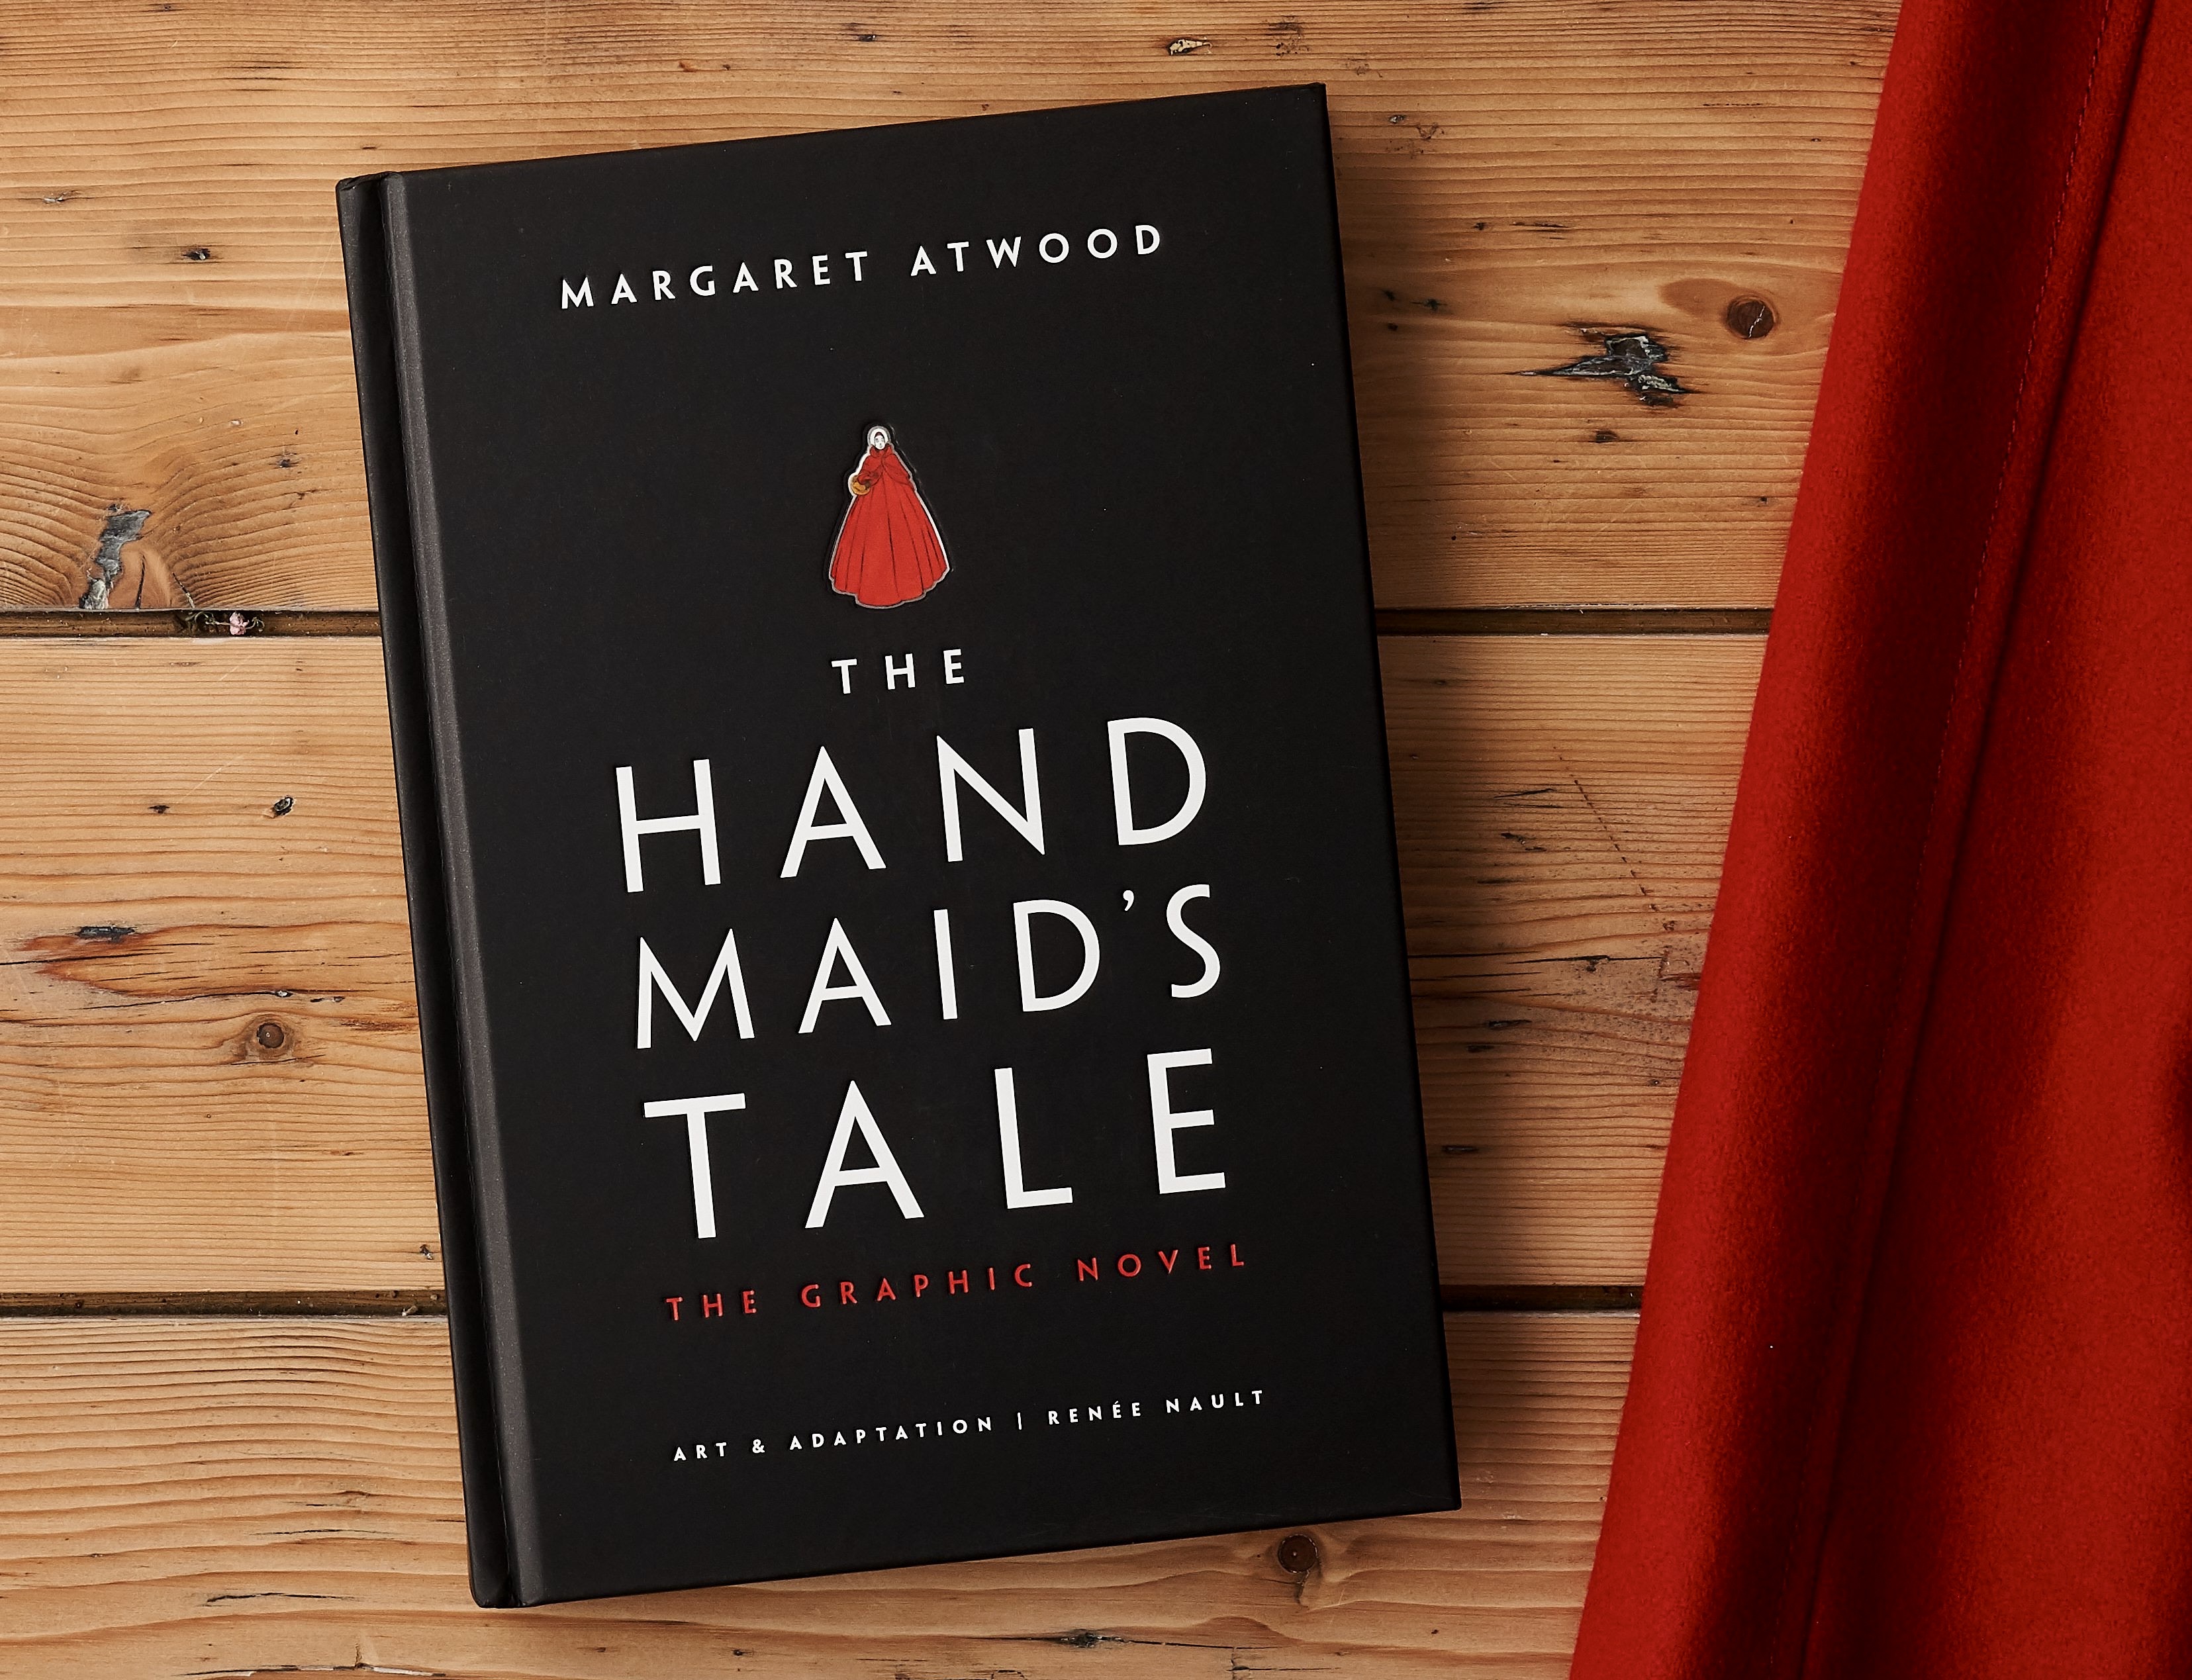 The Handmaid’s Tale vs. The Handmaid’s Tale. The Graphic Novel as a Modern Reading of the Traditional Novel